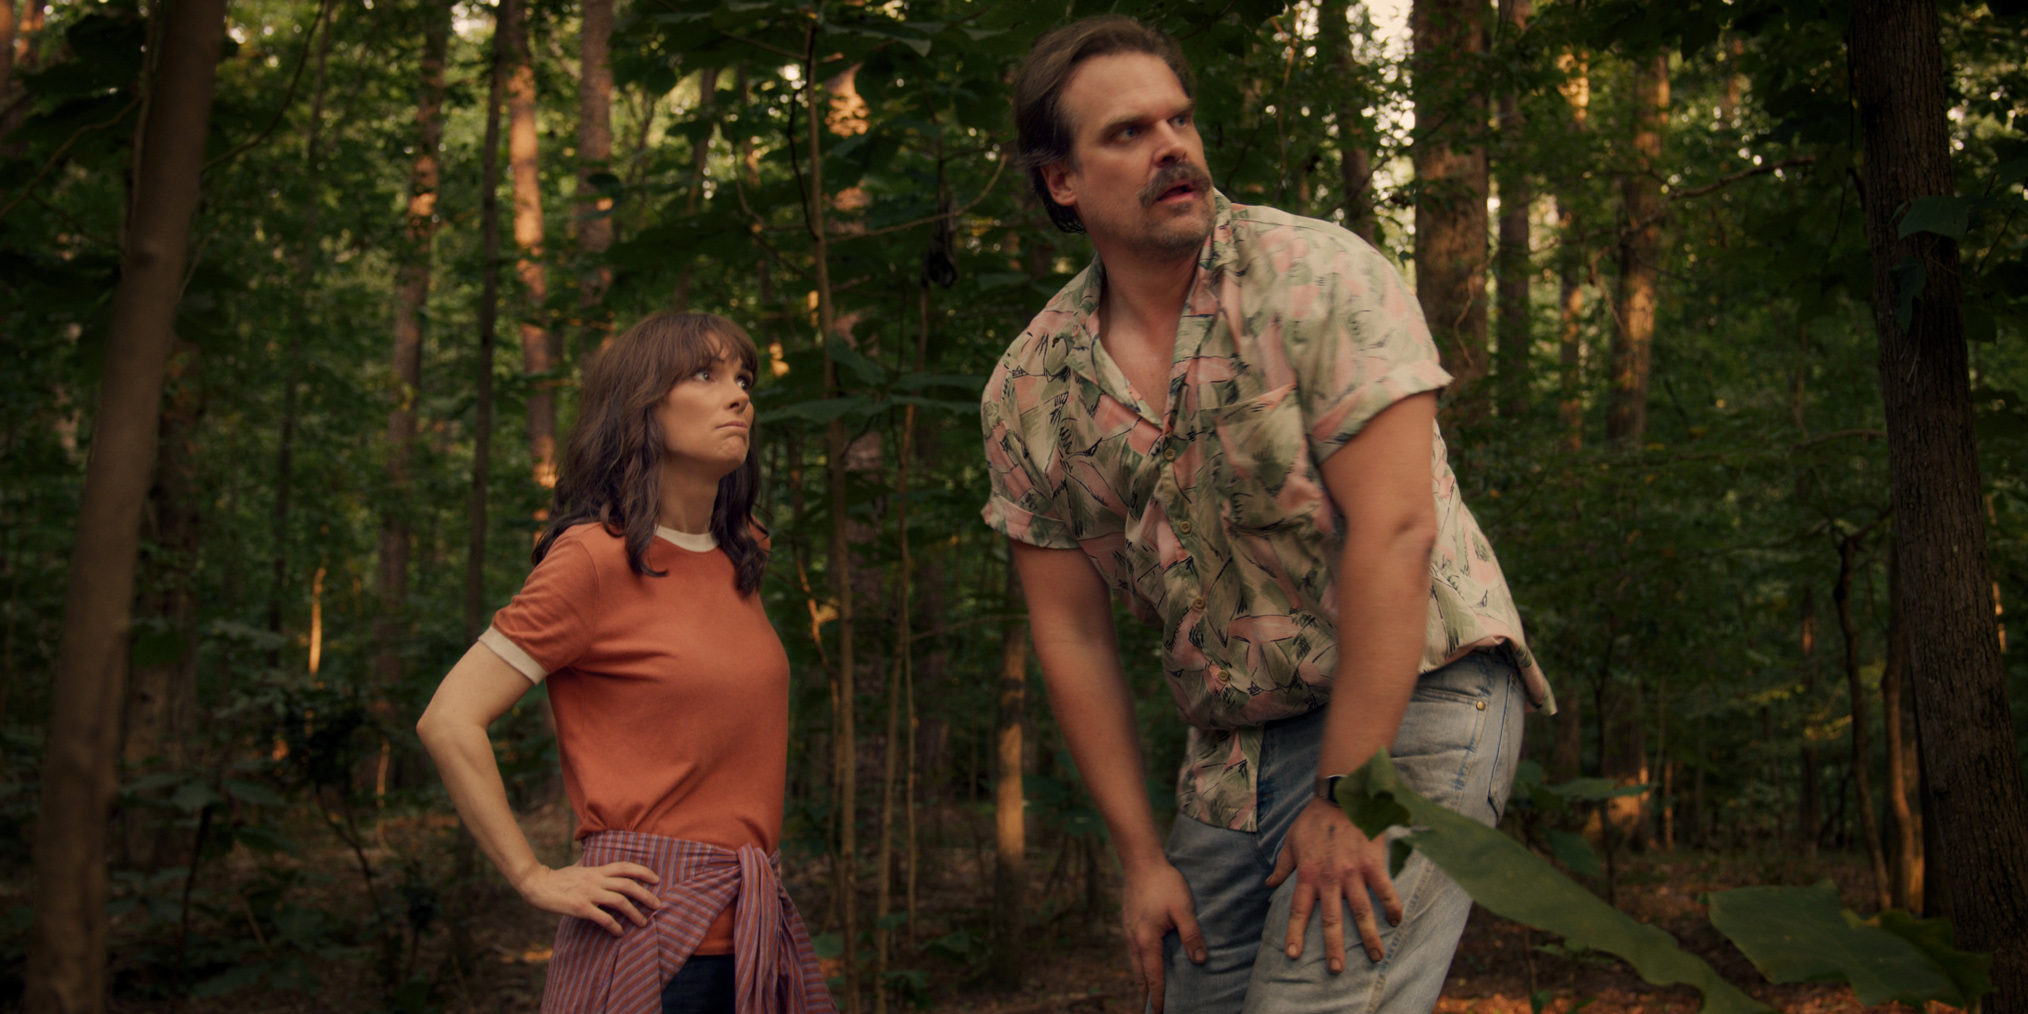 Body Horror And Belly Laughs In Stranger Things 3 Episode 5